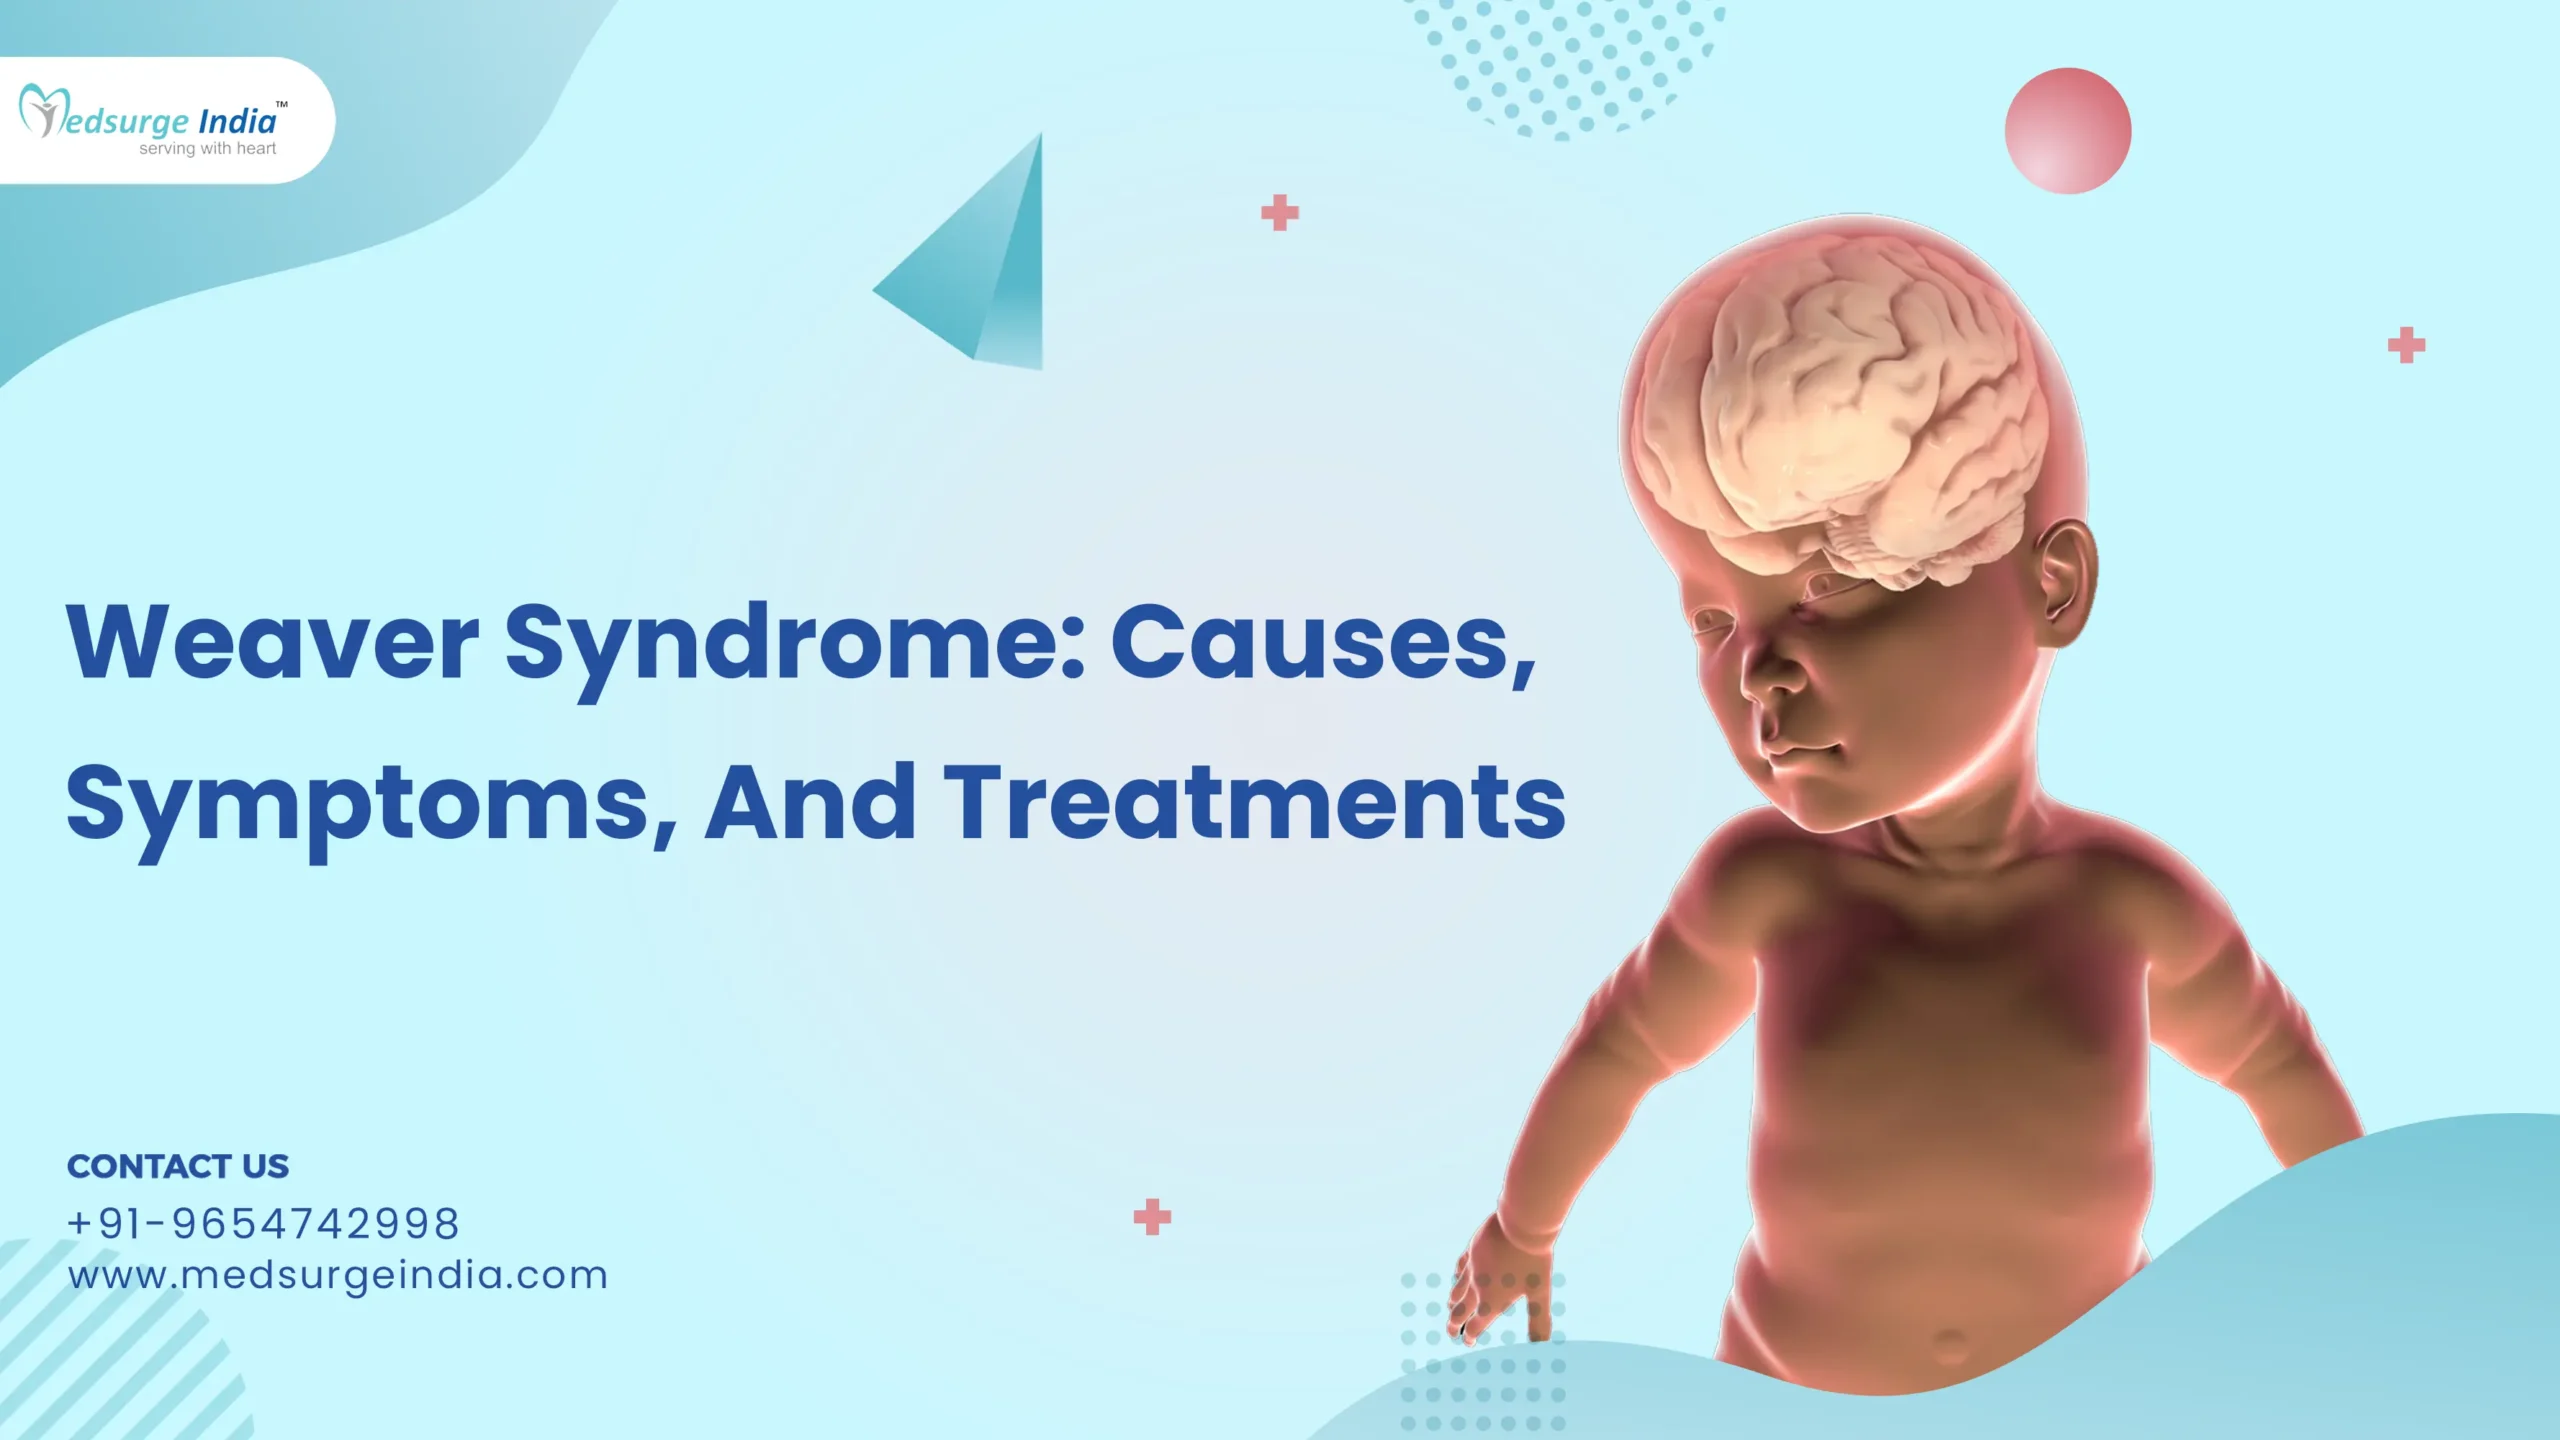 Weaver Syndrome: Causes, Symptoms, And Treatments